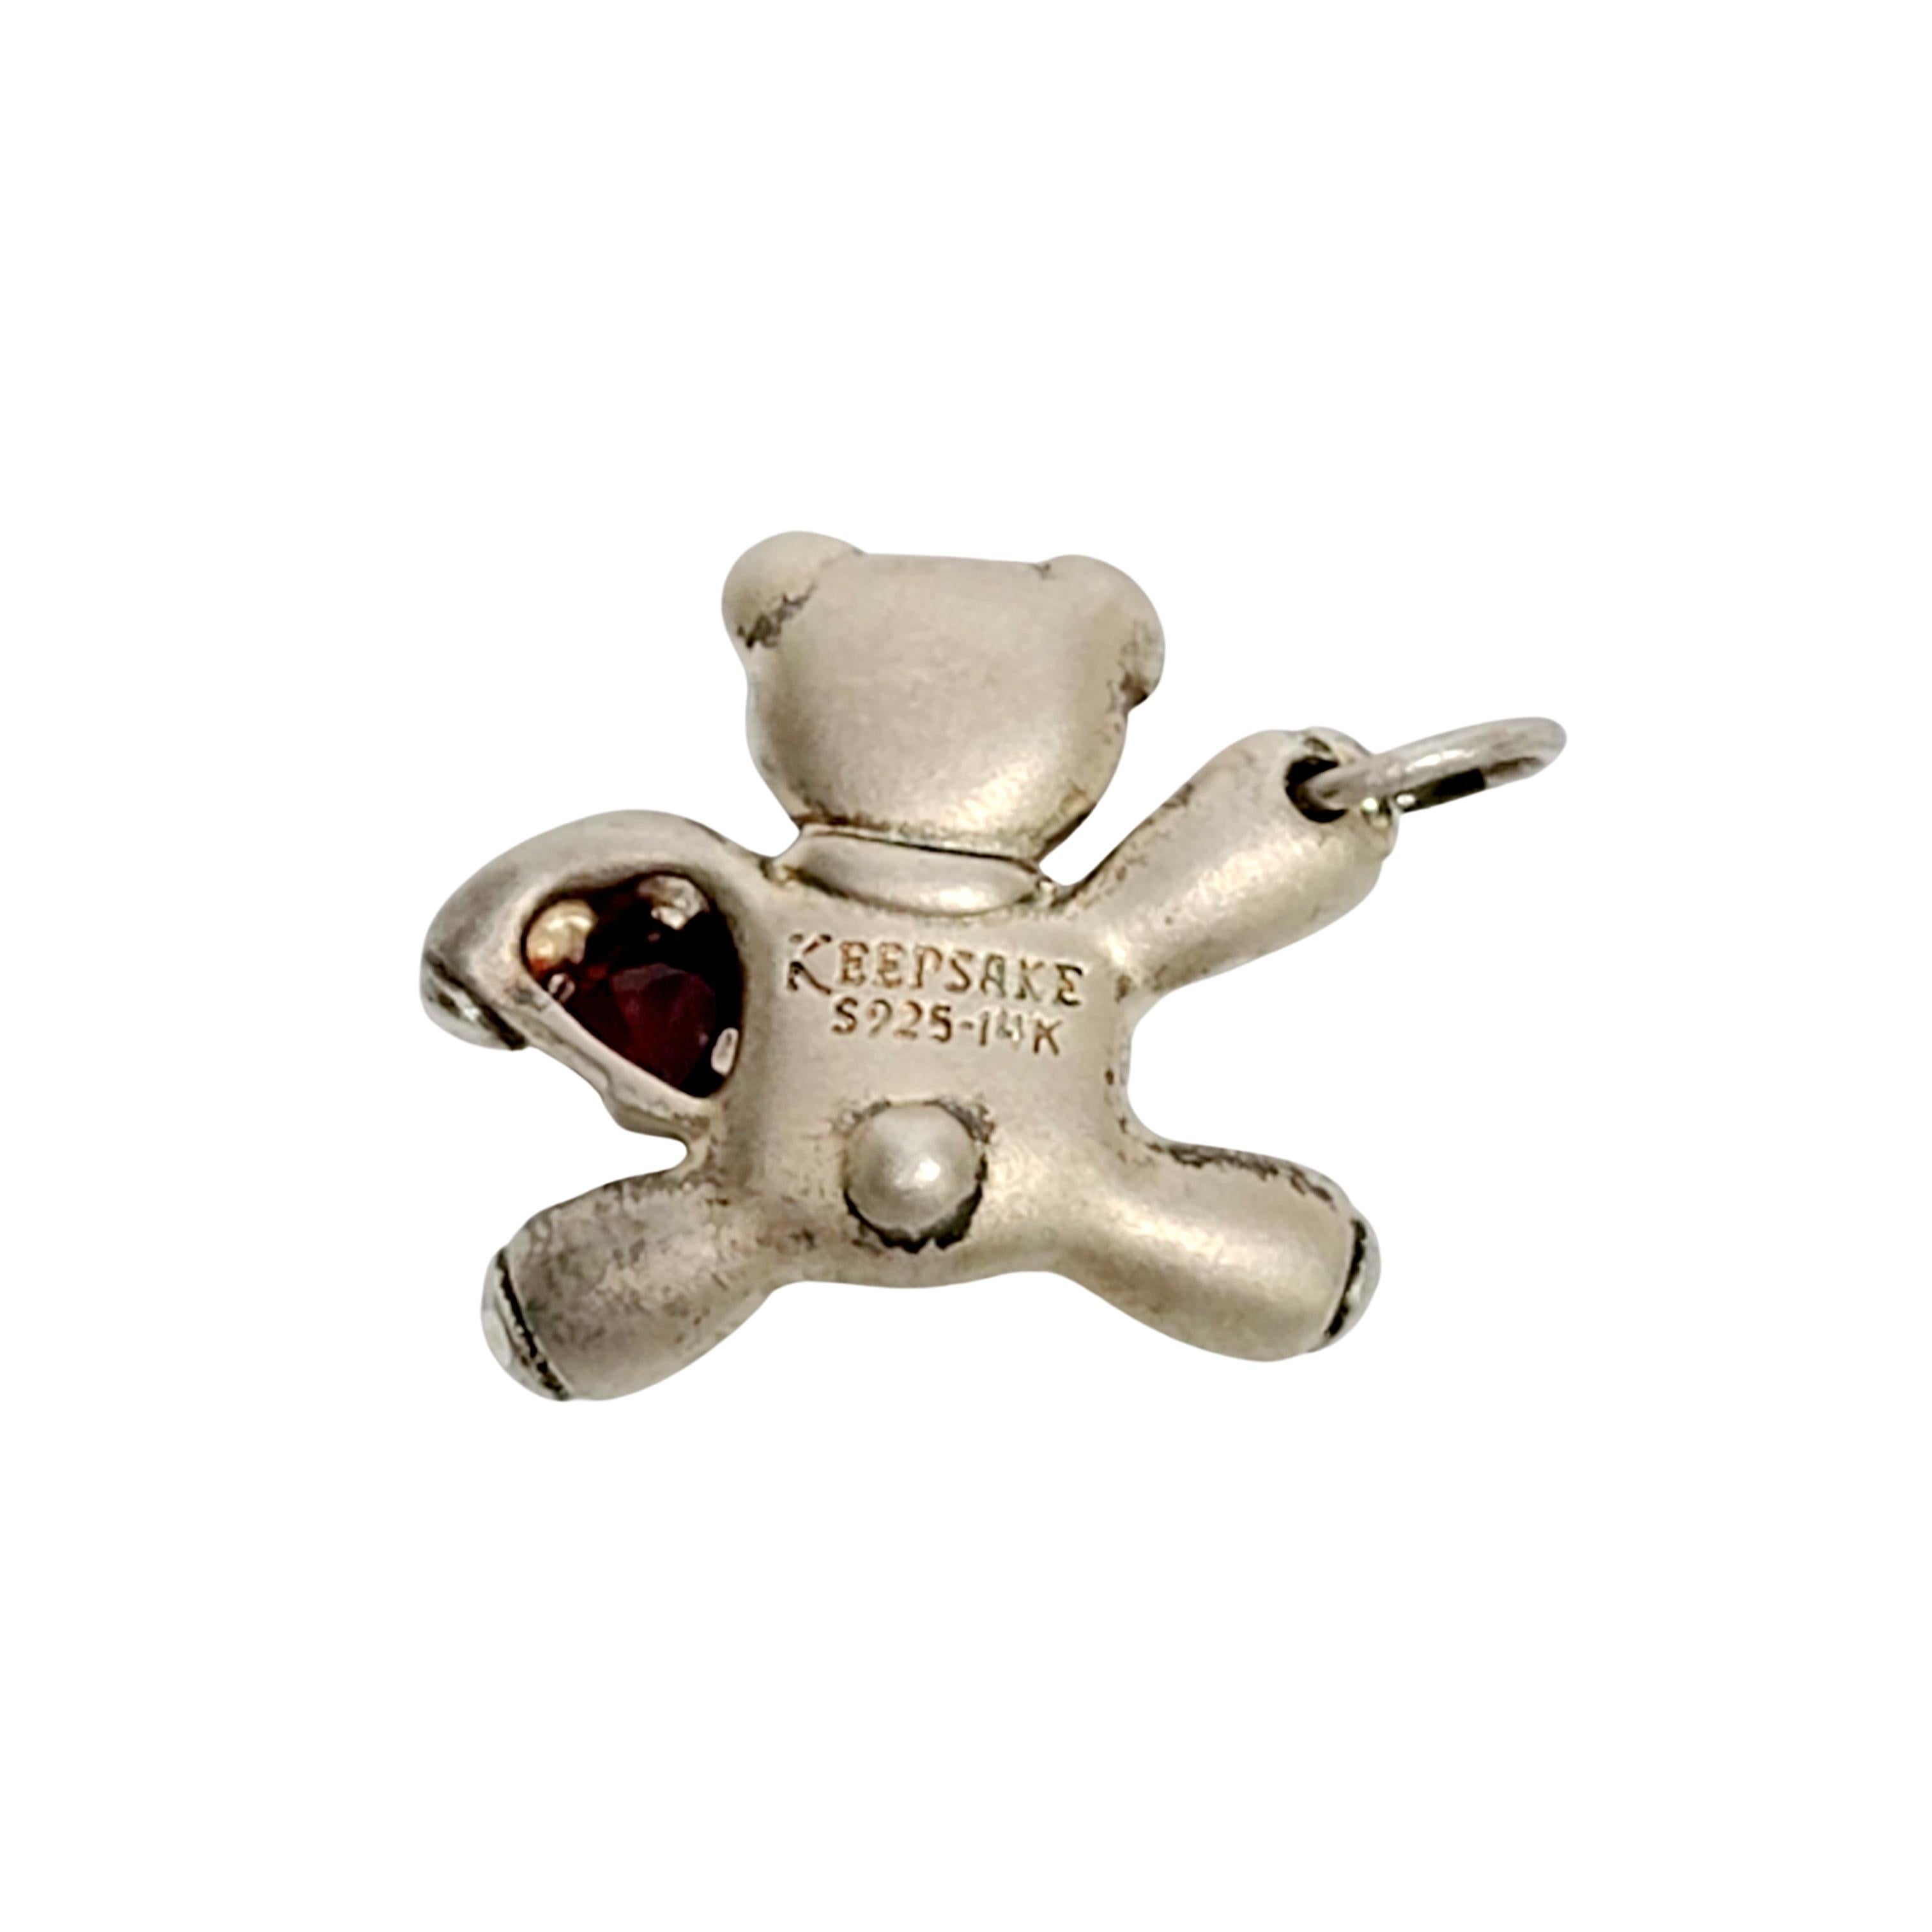 Sterling silver teddy bear pendant featuring a garnet heart and an initial L.

Adorable teddy bear pendant holding a garnet heart and wearing a gold scarf with the initial L.

Measures approx  3/4